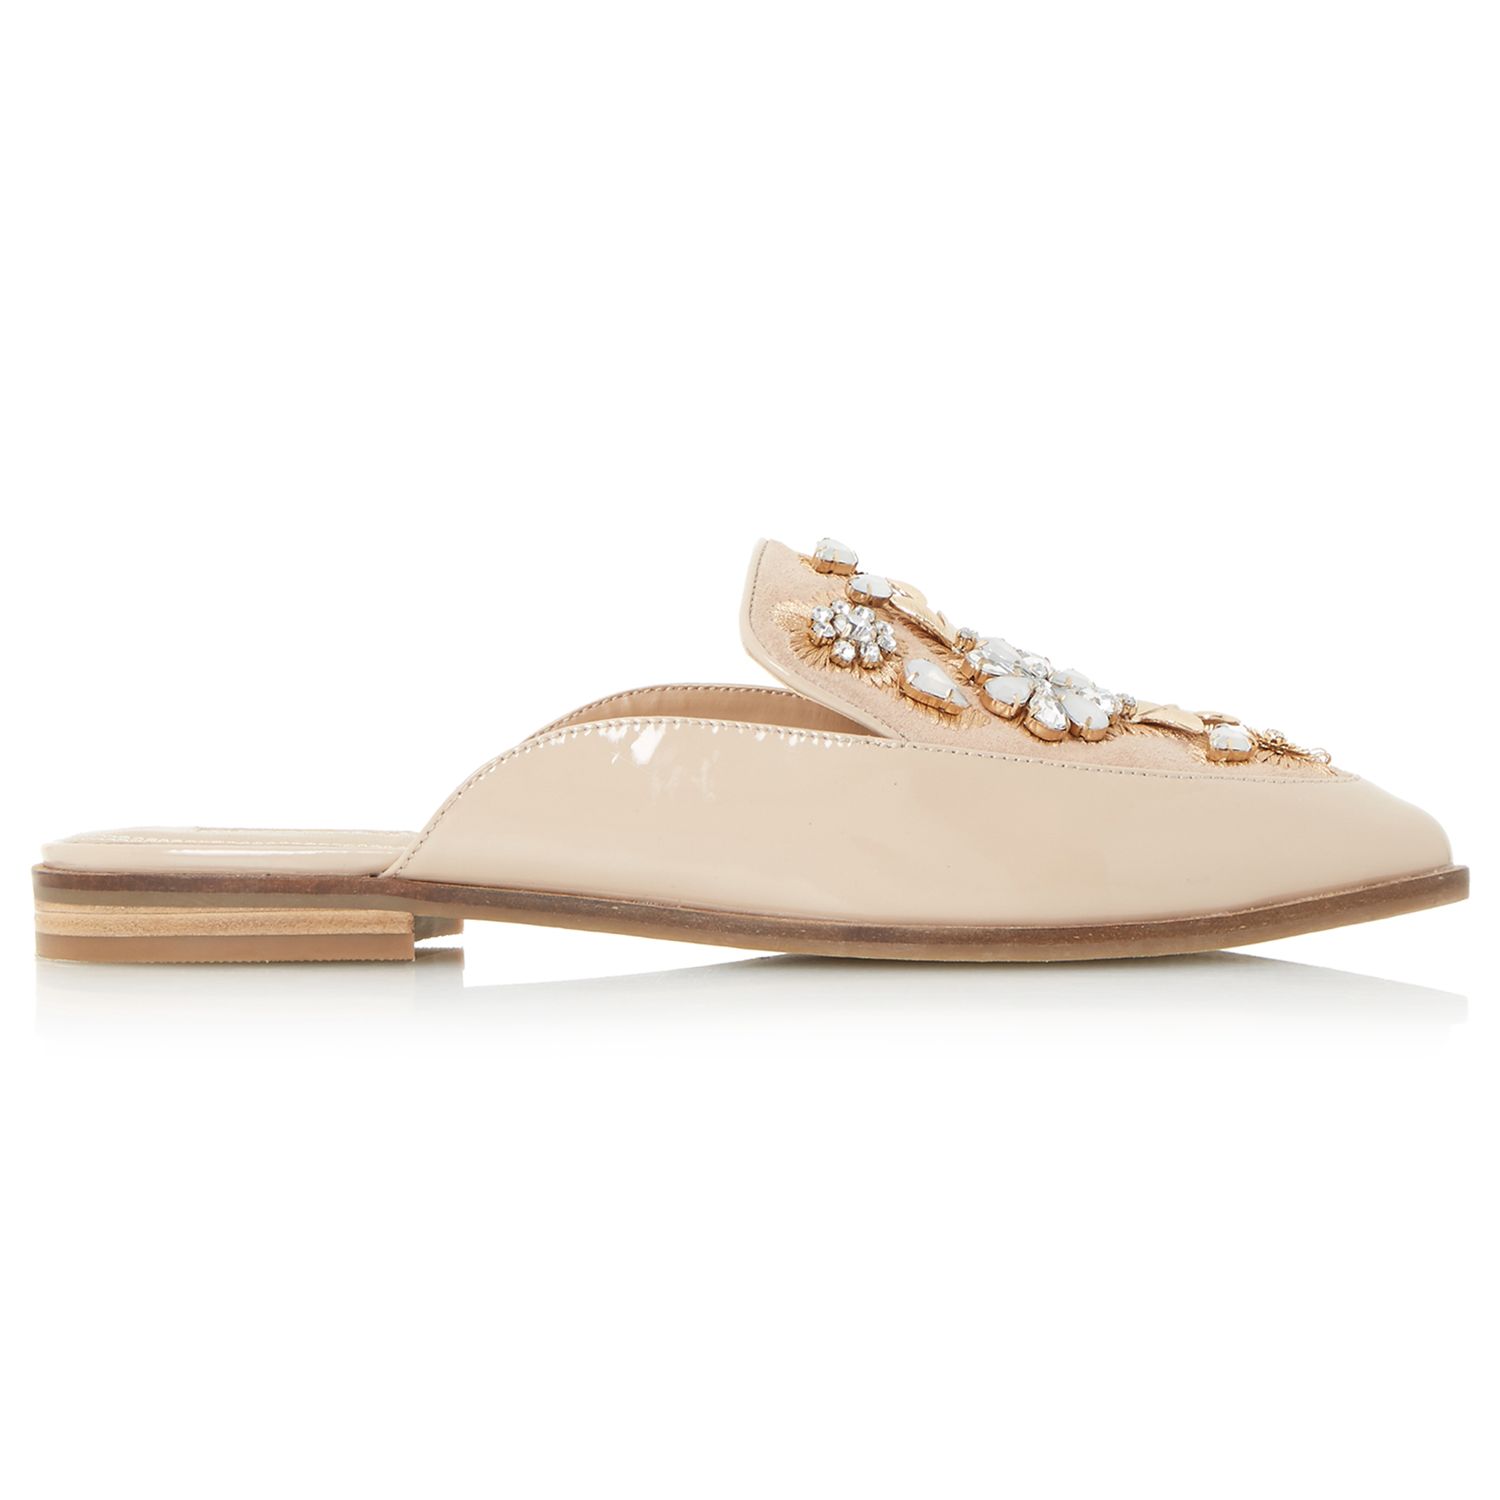 Dune Gemily Embellished Pointed Toe Mule Loafers, Nude, 8